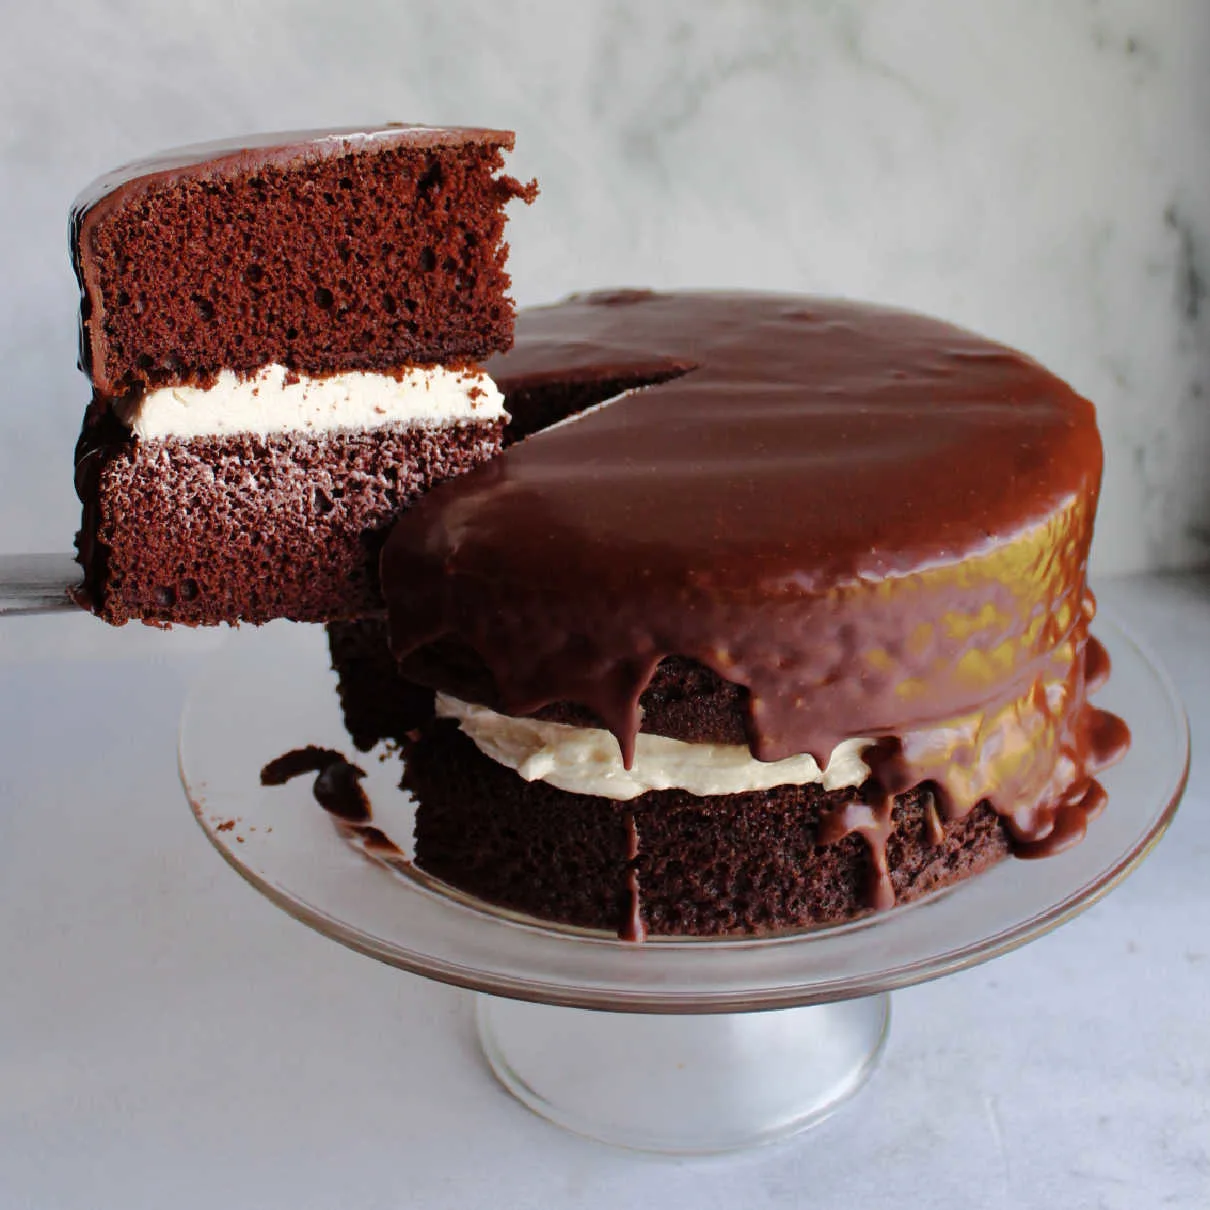 Lifting slice of ding dong cake out of cake, showing chocolate cake layers, creamy vanilla filling and dark chocolate icing.